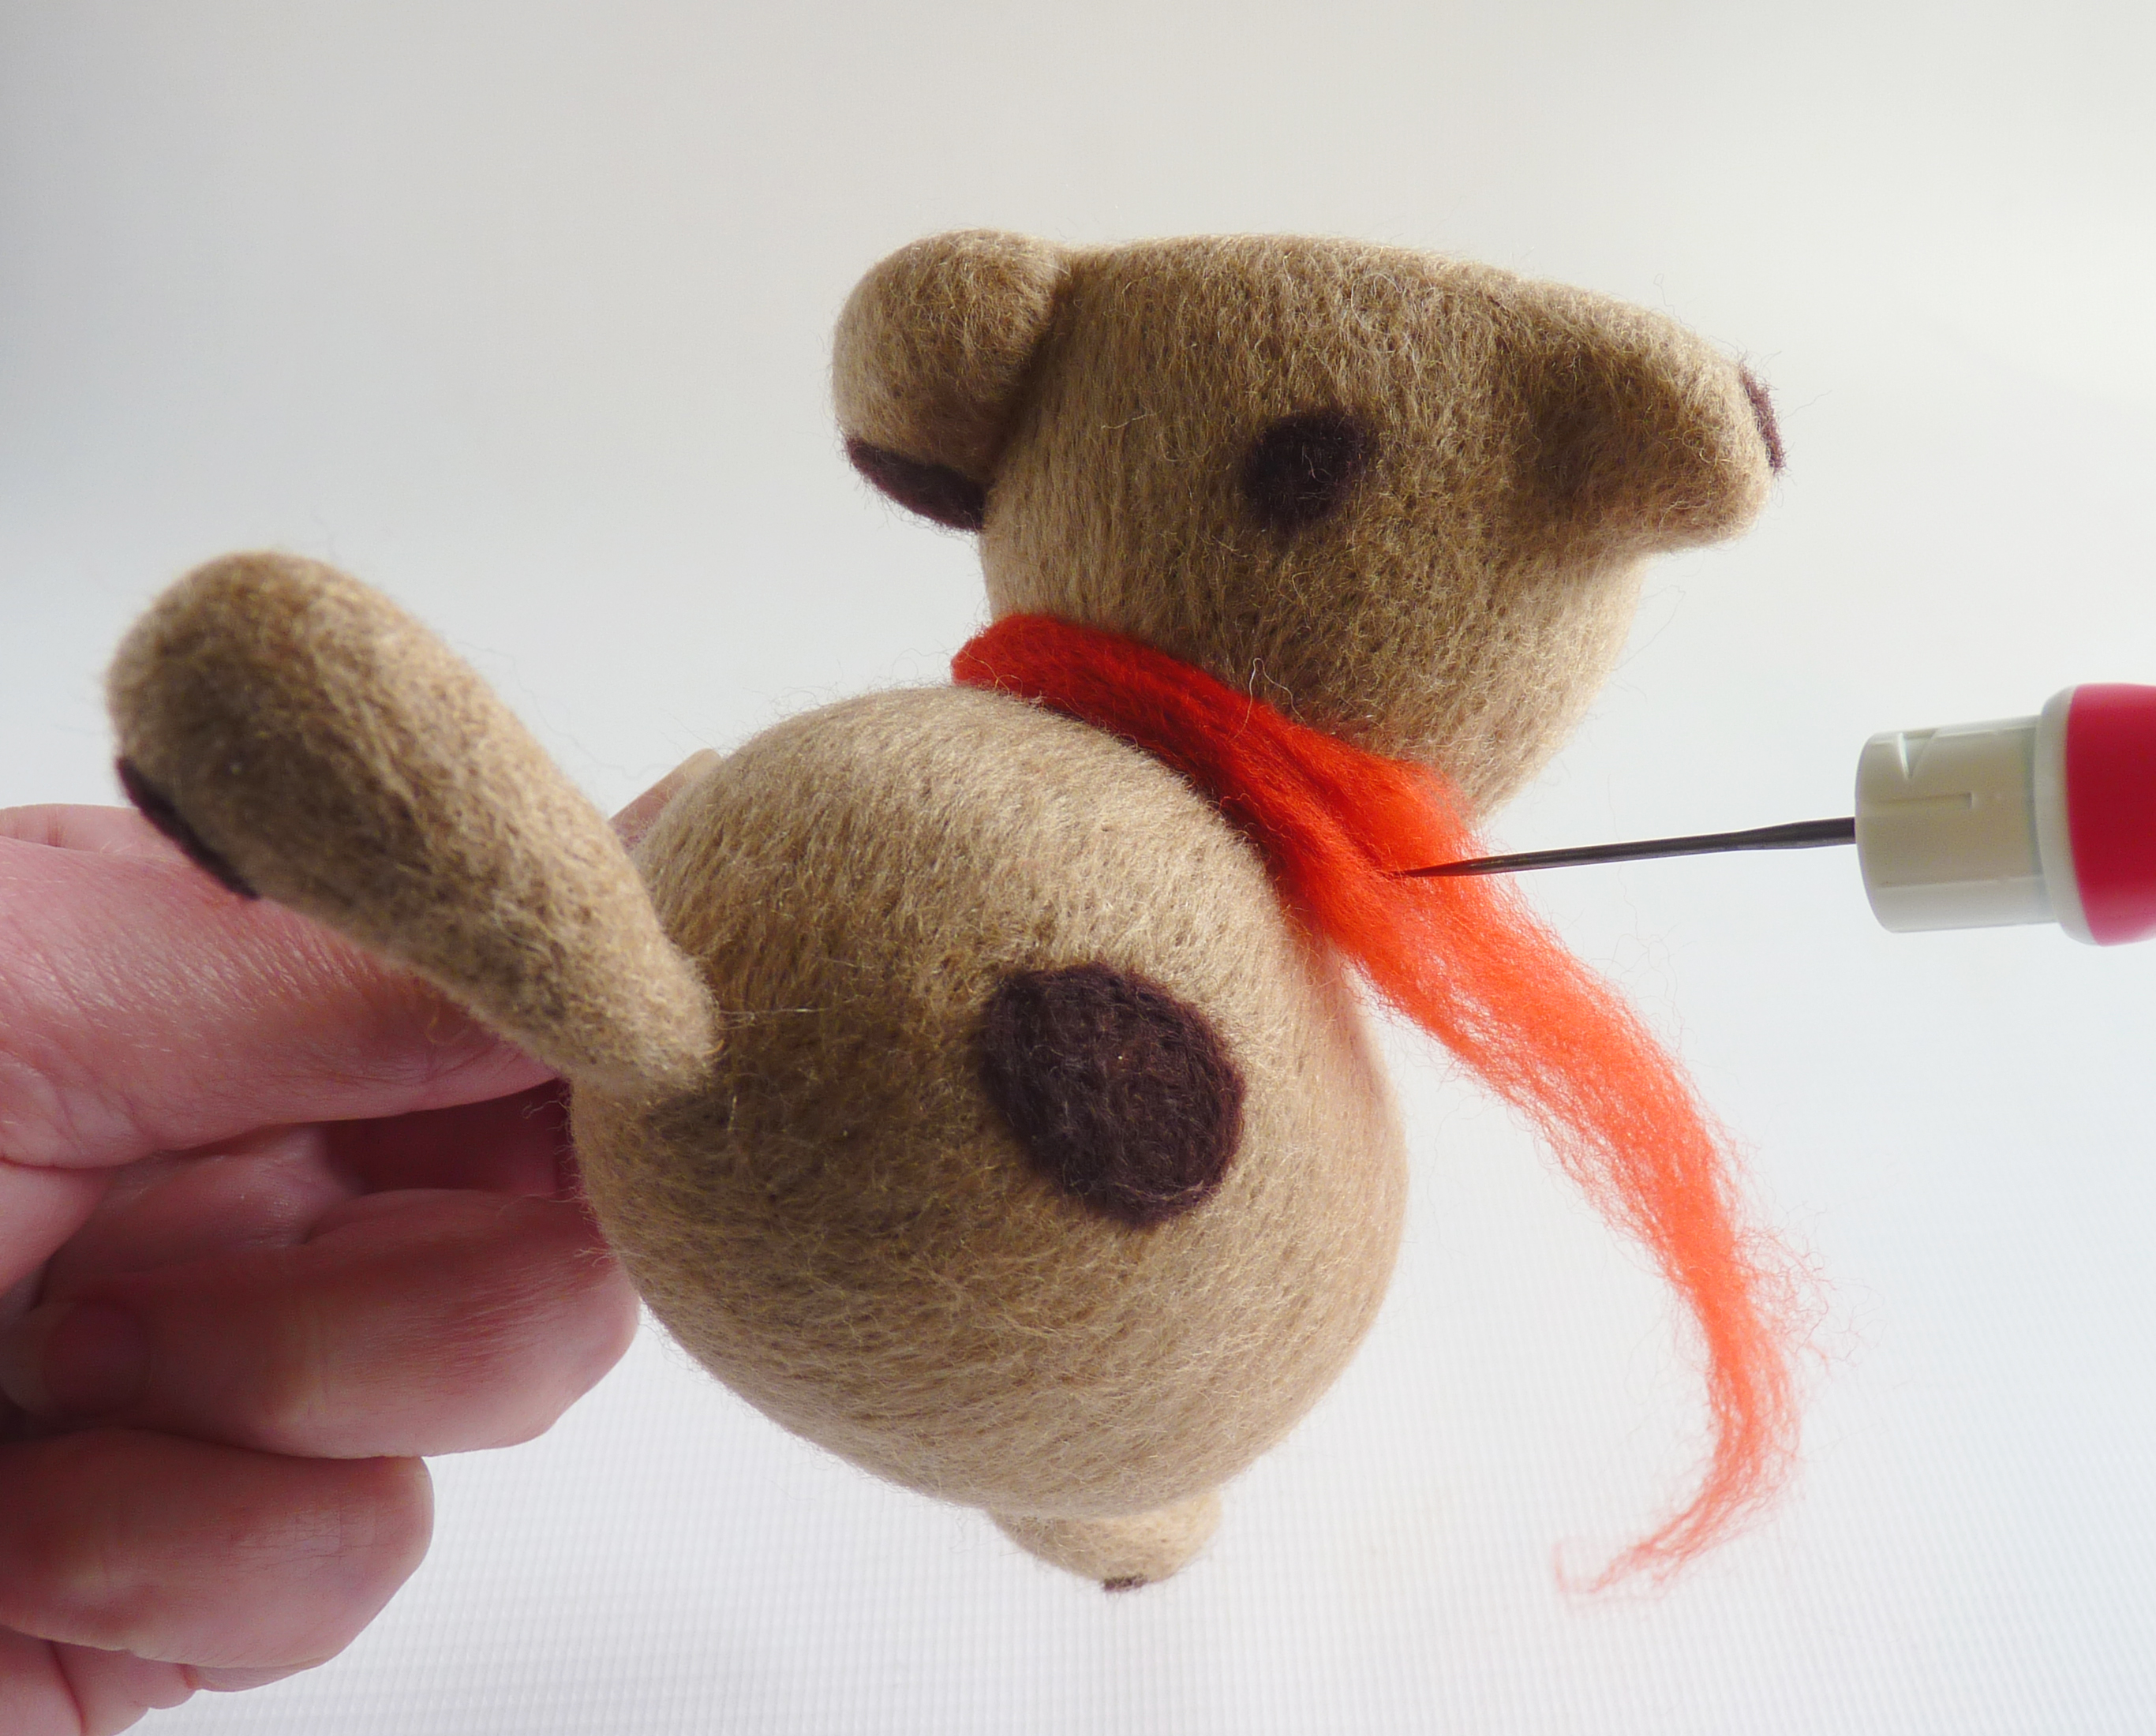 How to make needle felted animals - step 22